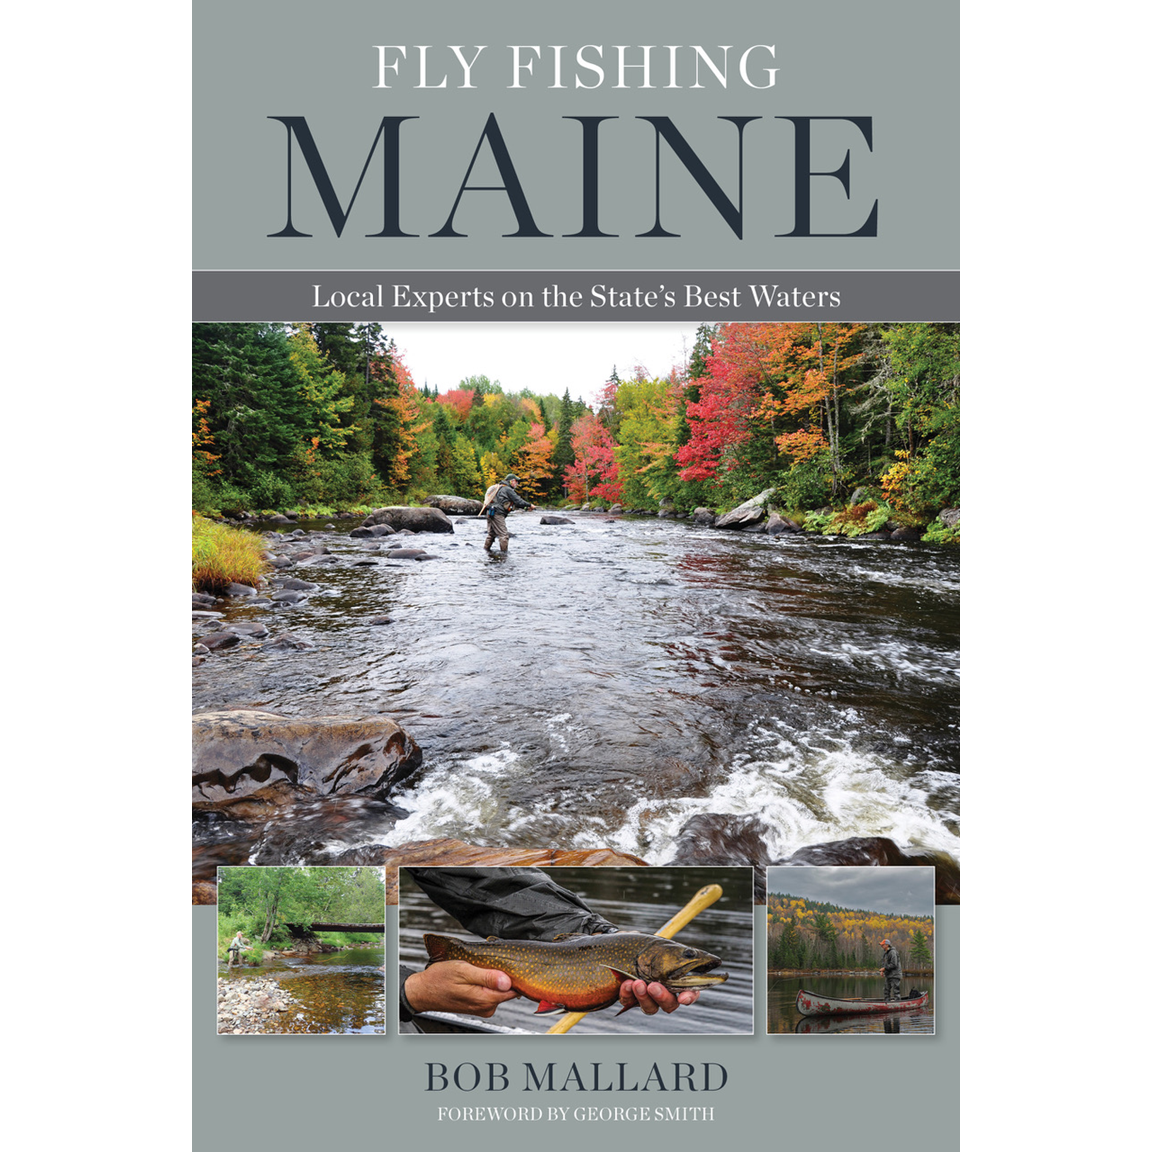 FLY FISHING MAINE: LOCAL EXPERTS ON THE STATE'S BEST WATERS